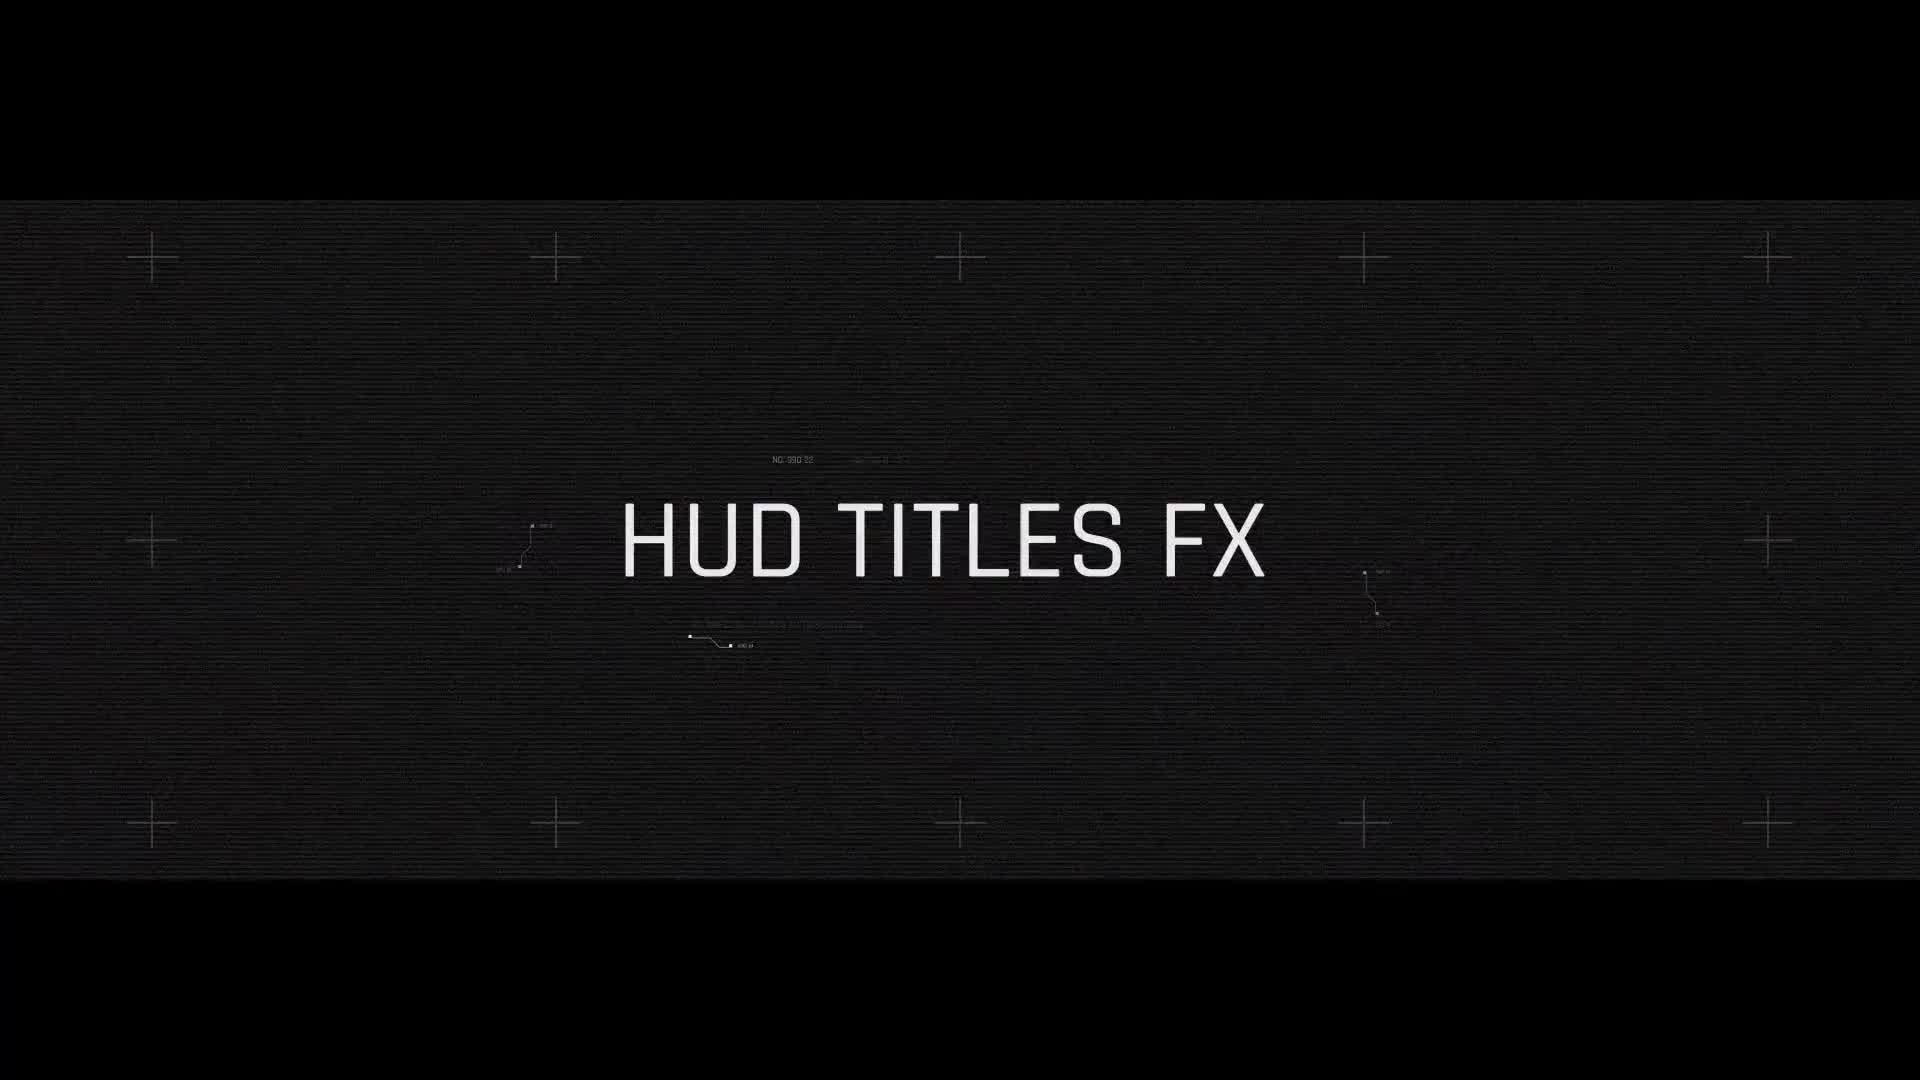 HUD Titles FX - Download Videohive 20177970